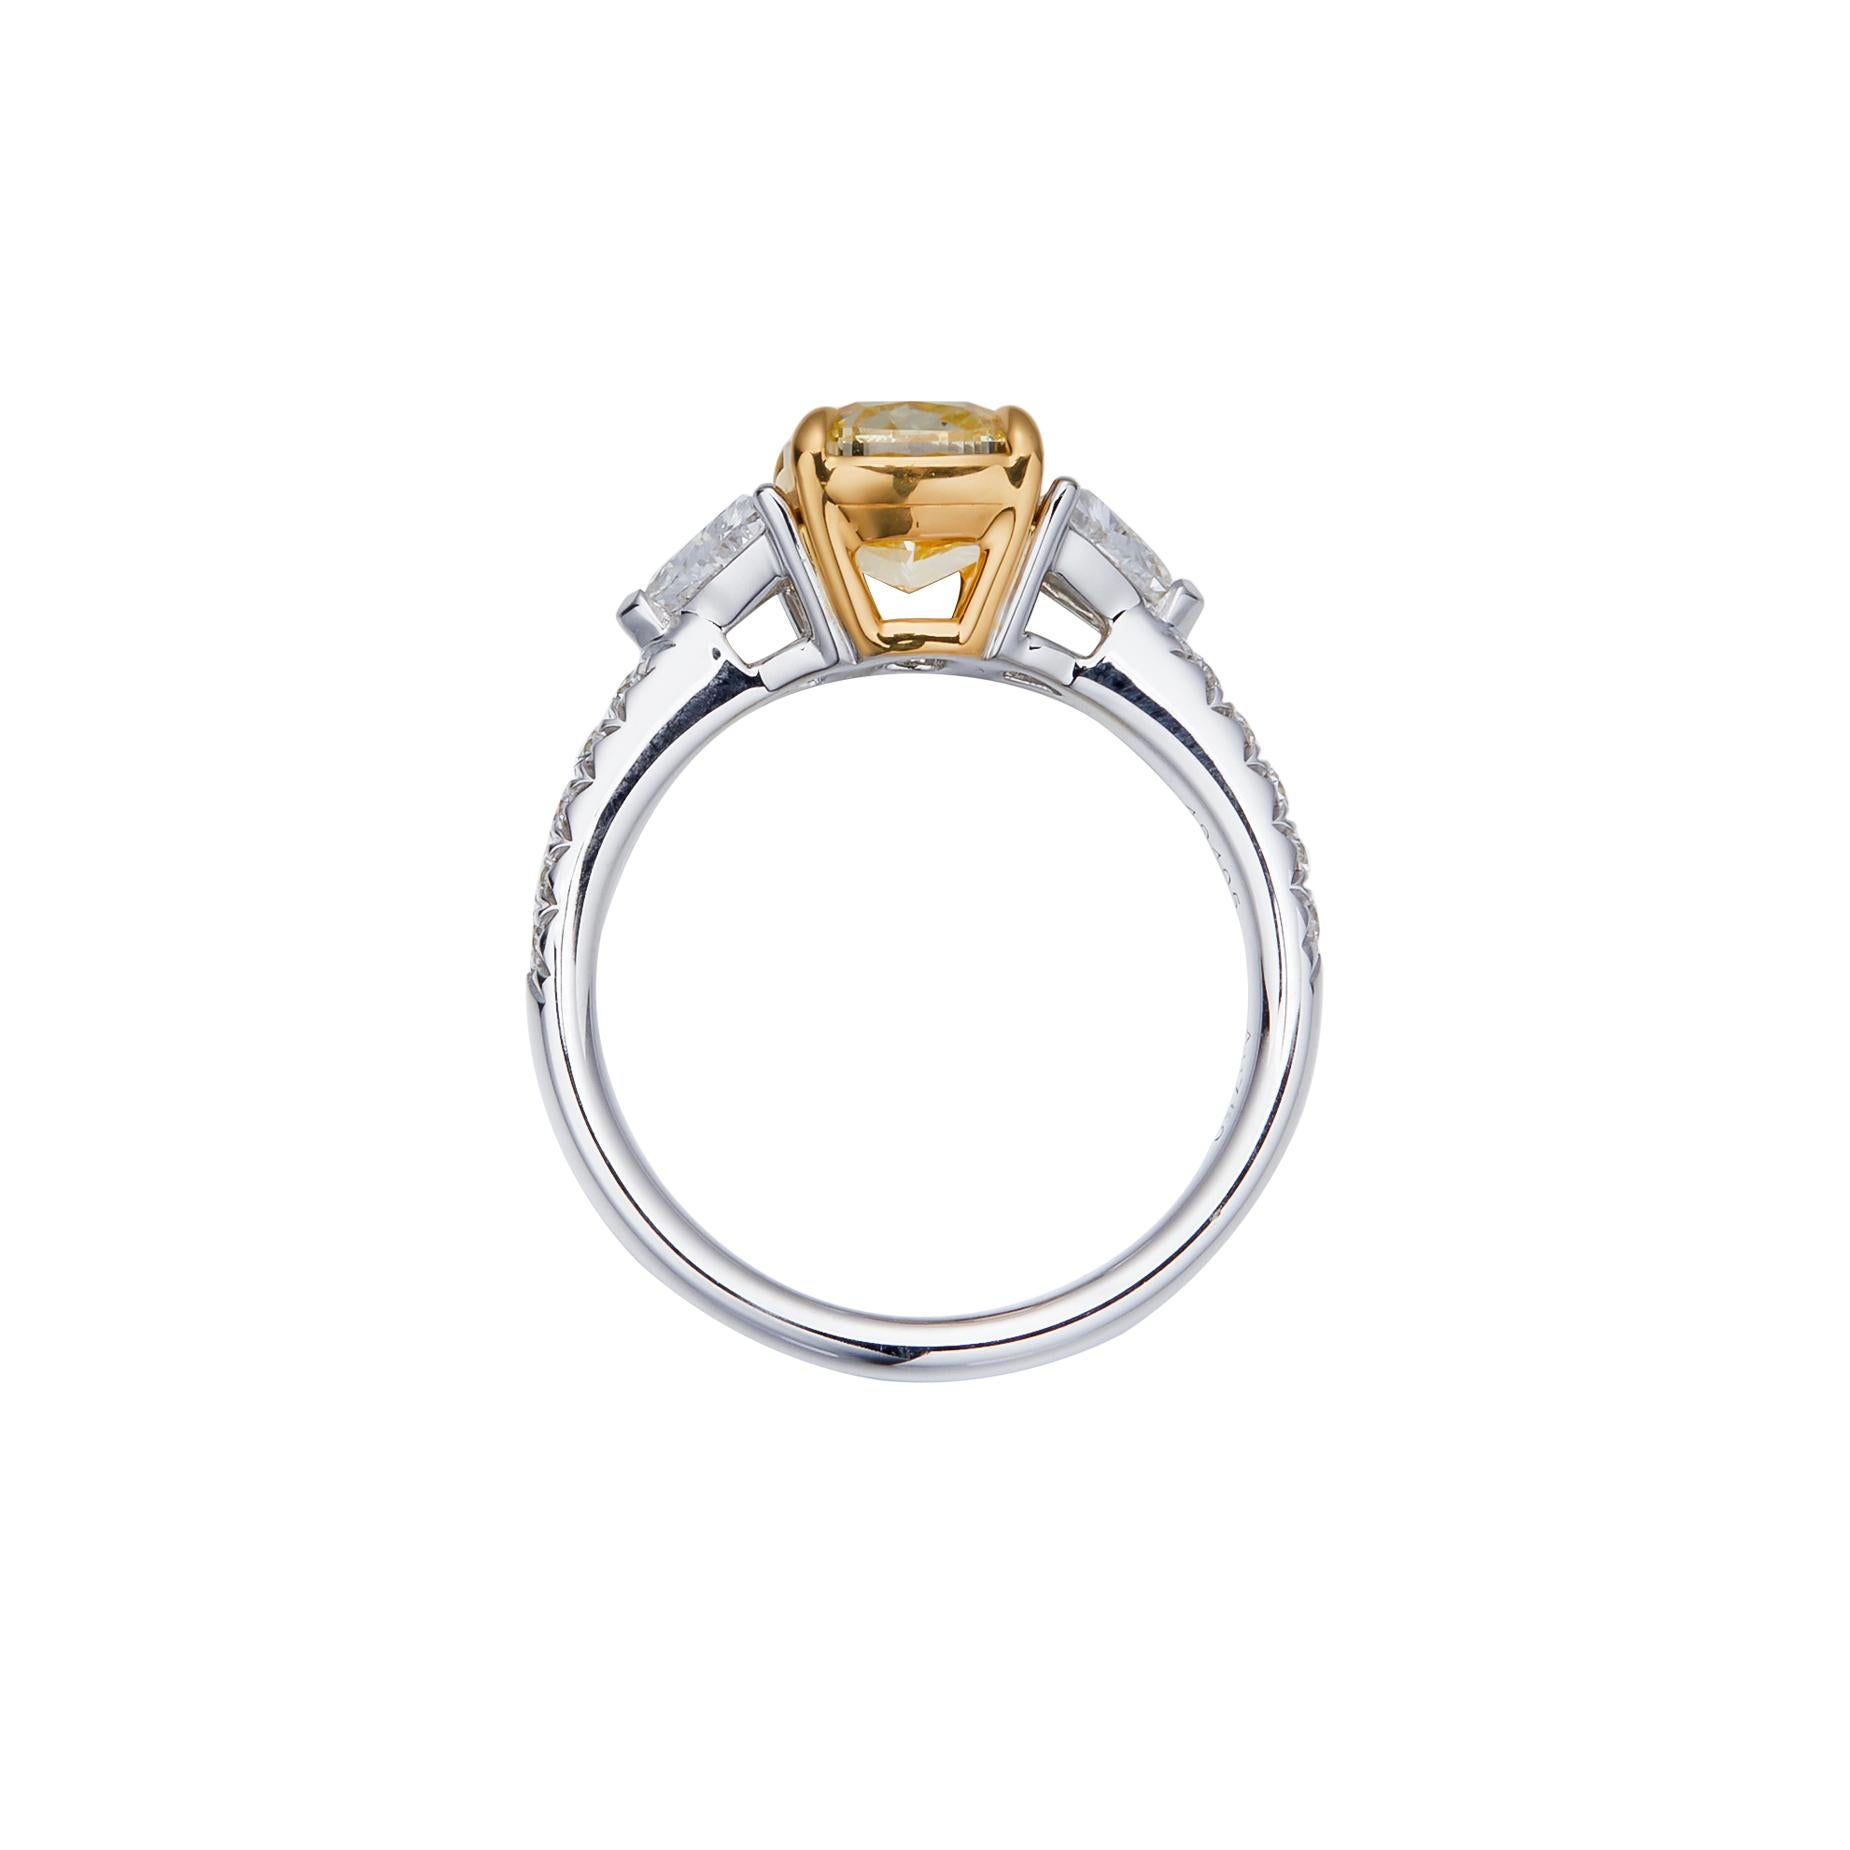 Contemporary GIA Certified 2.03ct Cushion Cut Natural Fancy Light Yellow Diamond Ring 18KT. For Sale